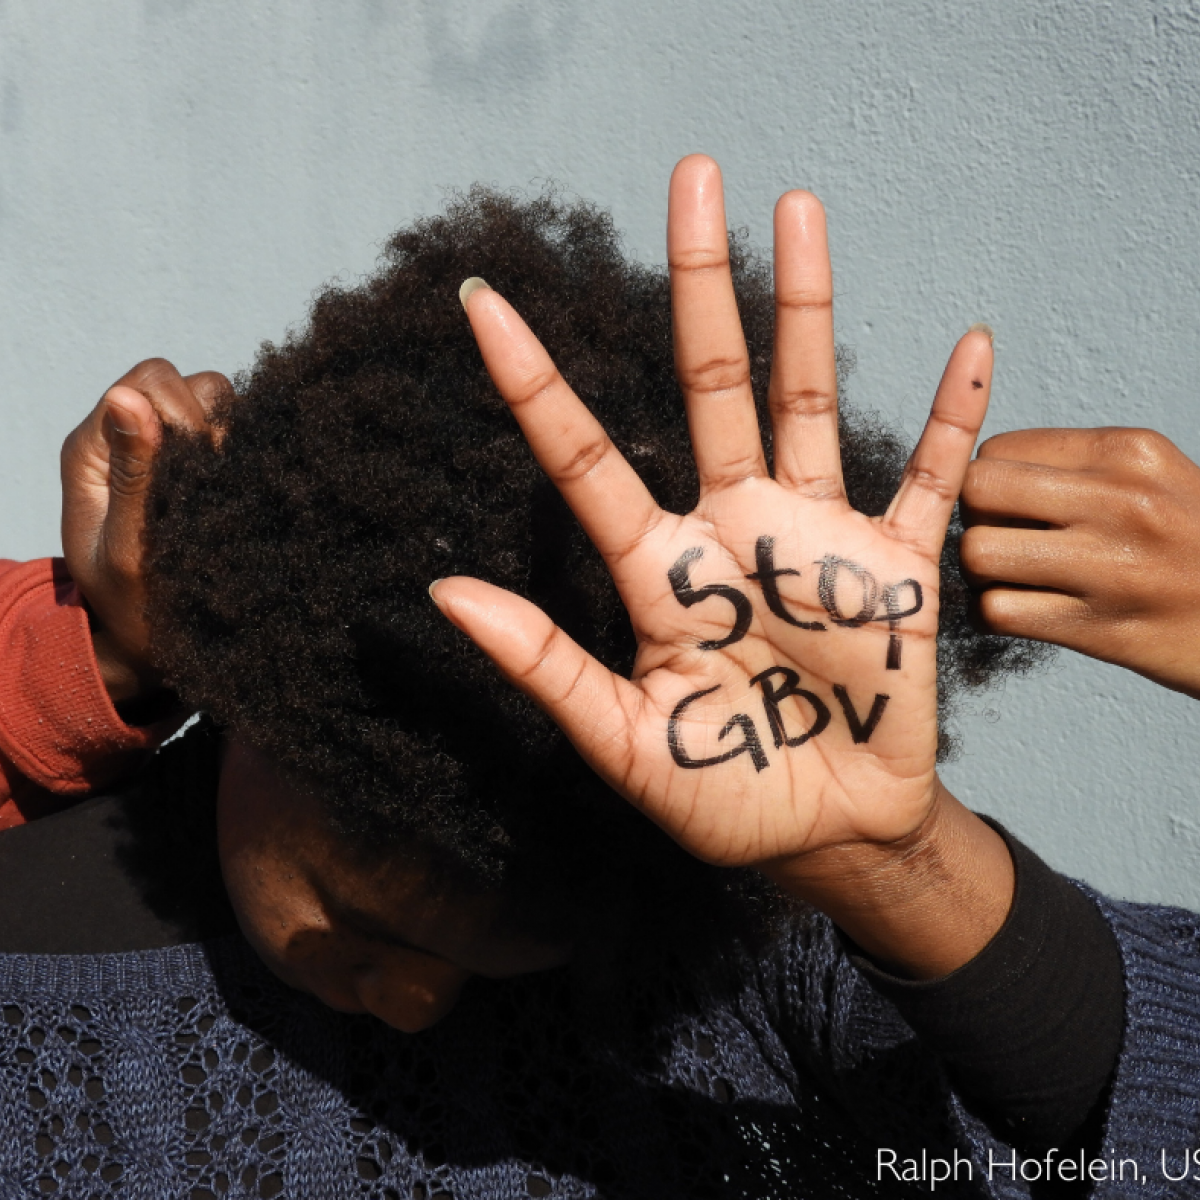 A woman shows her hand with the words "Stop GBV"